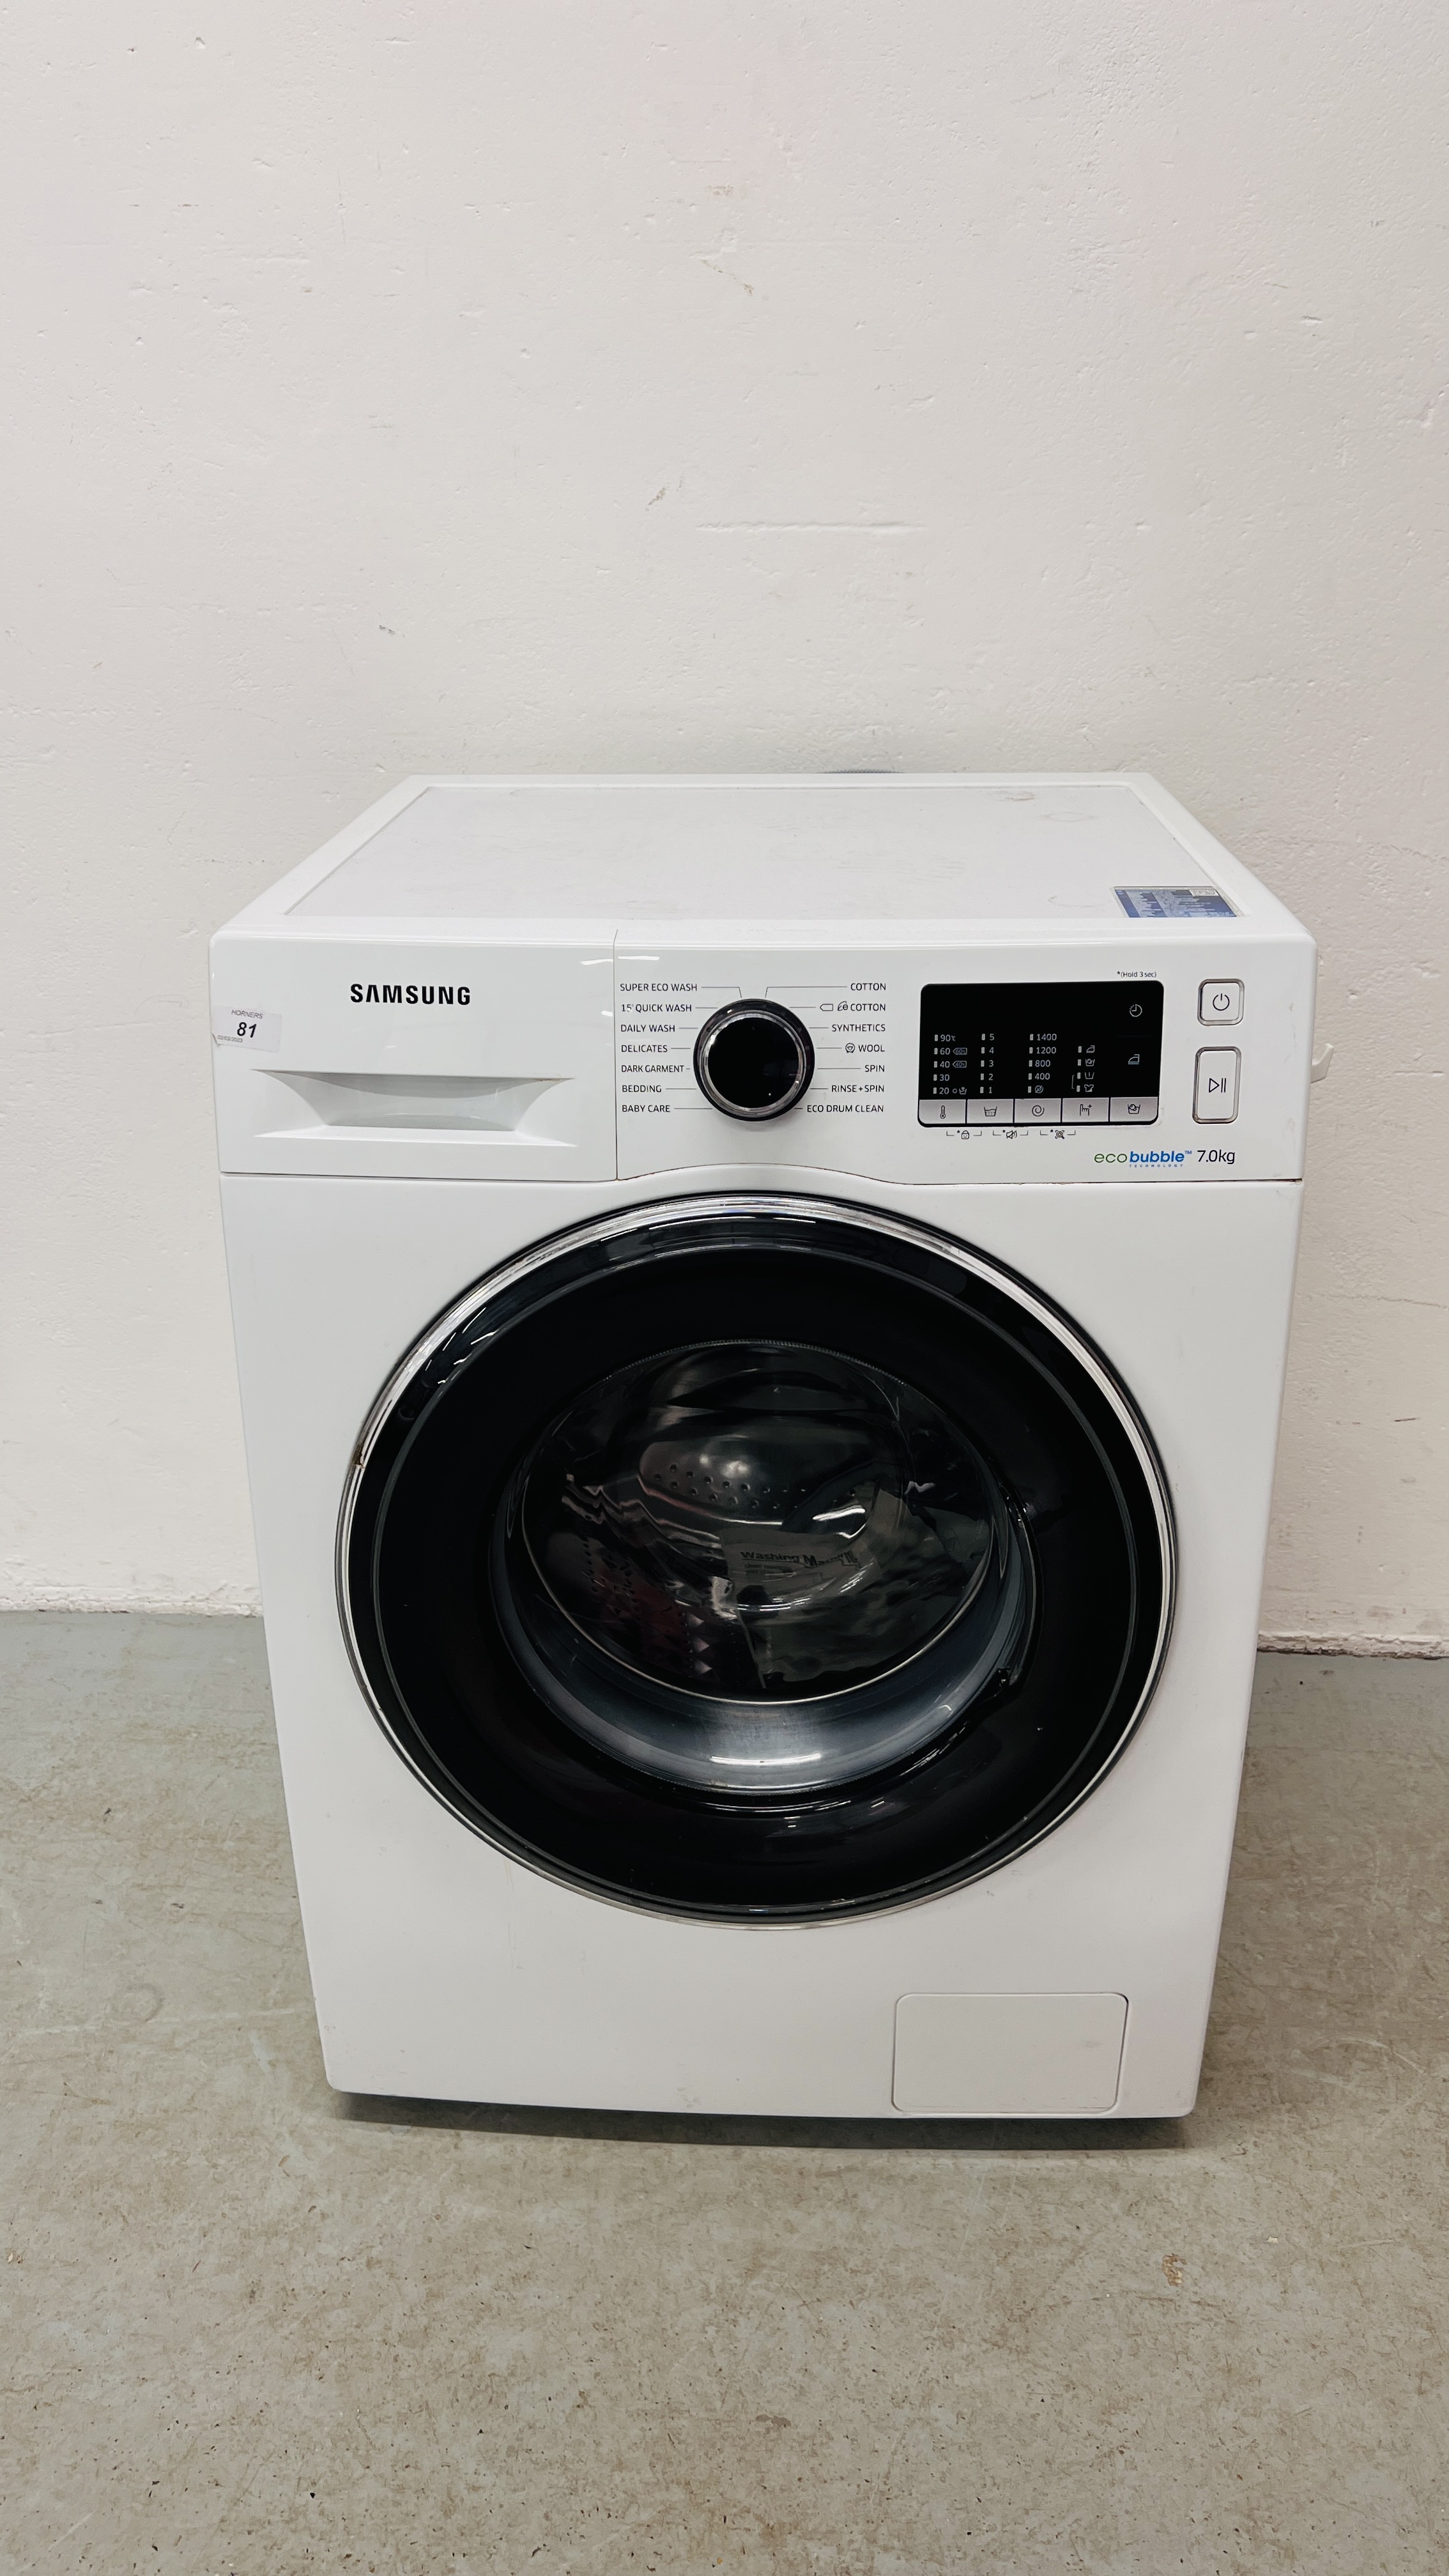 A SAMSUNG ECO BUBBLE 7KG WASHING MACHINE - SOLD AS SEEN.